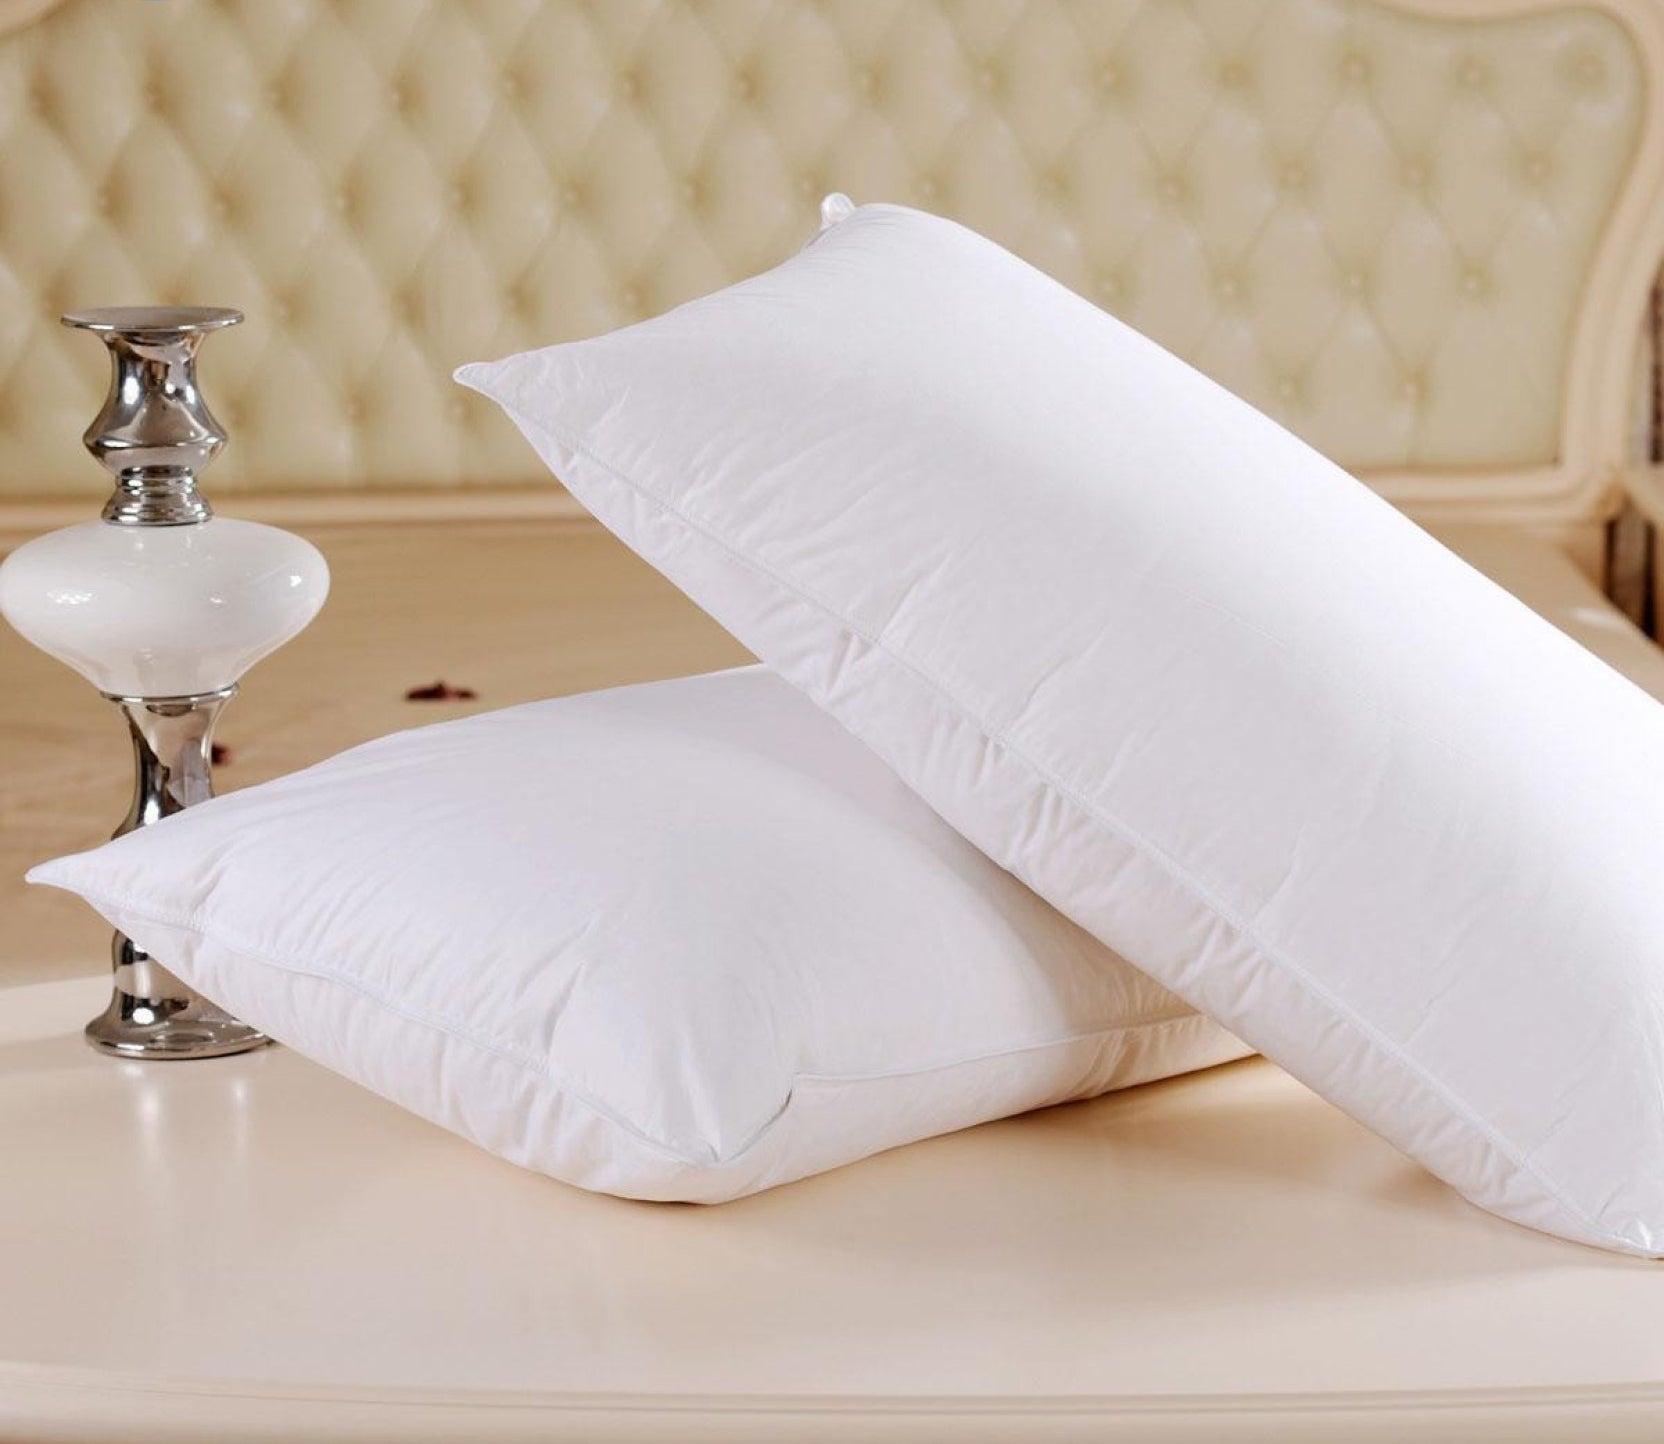 JDX White Pillows for Sleeping 2 Pack with Luxury Hotel Quality